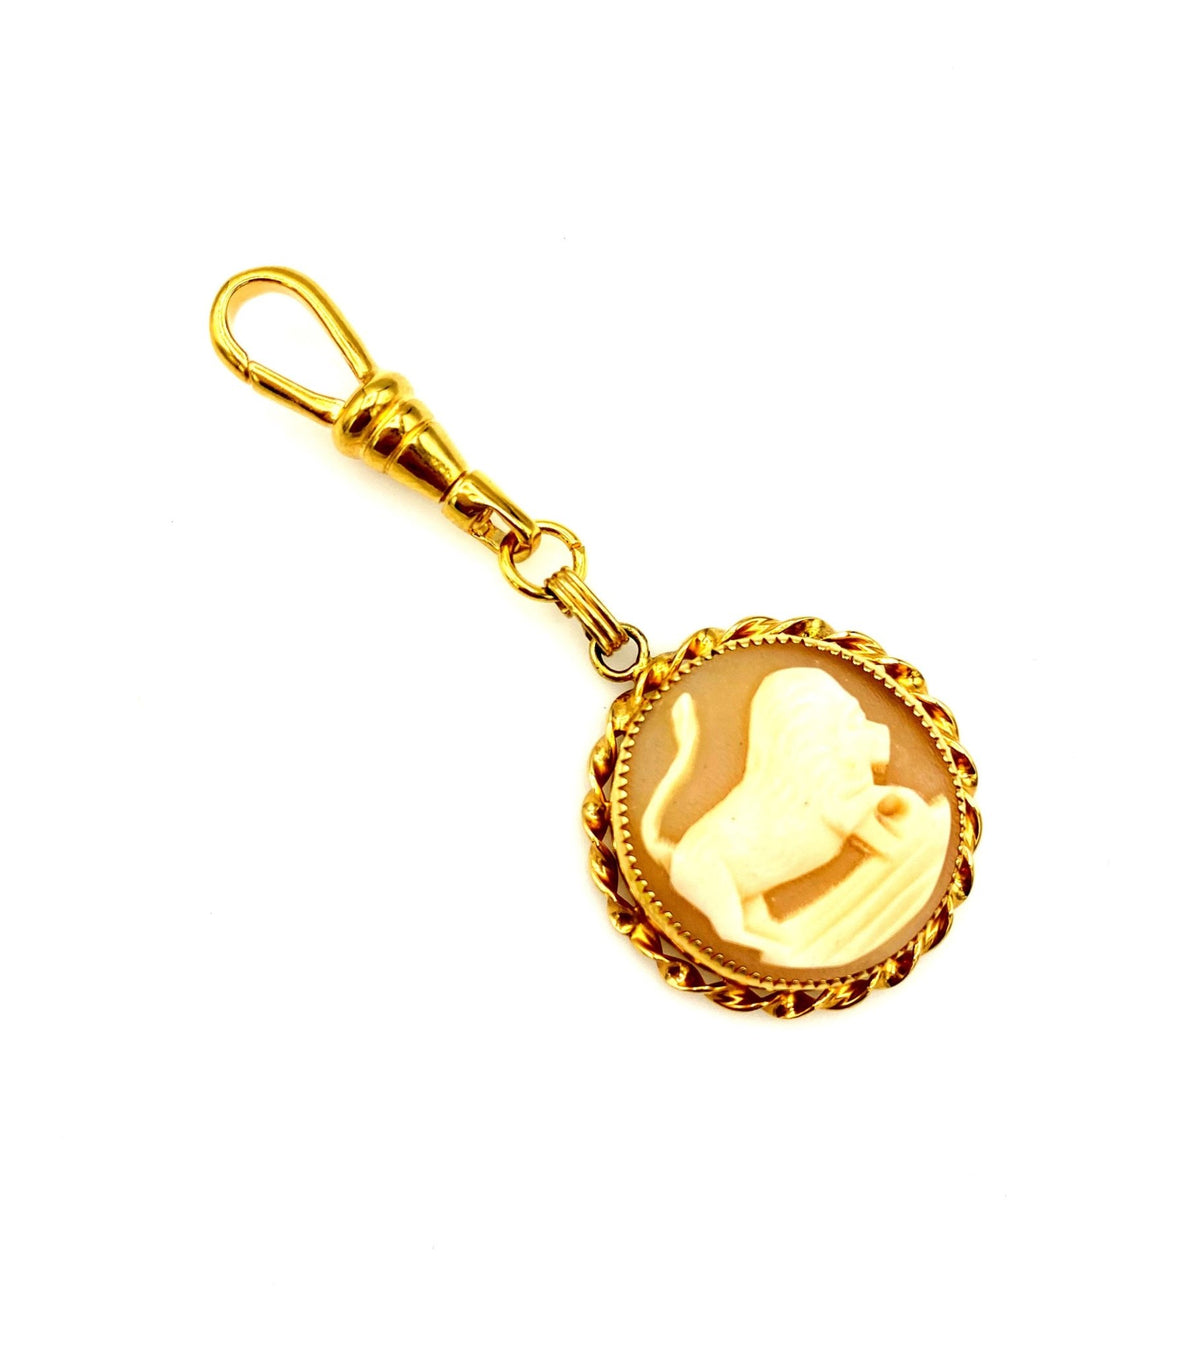 Gold Filled Lion Cameo Charm - 24 Wishes Vintage Jewelry